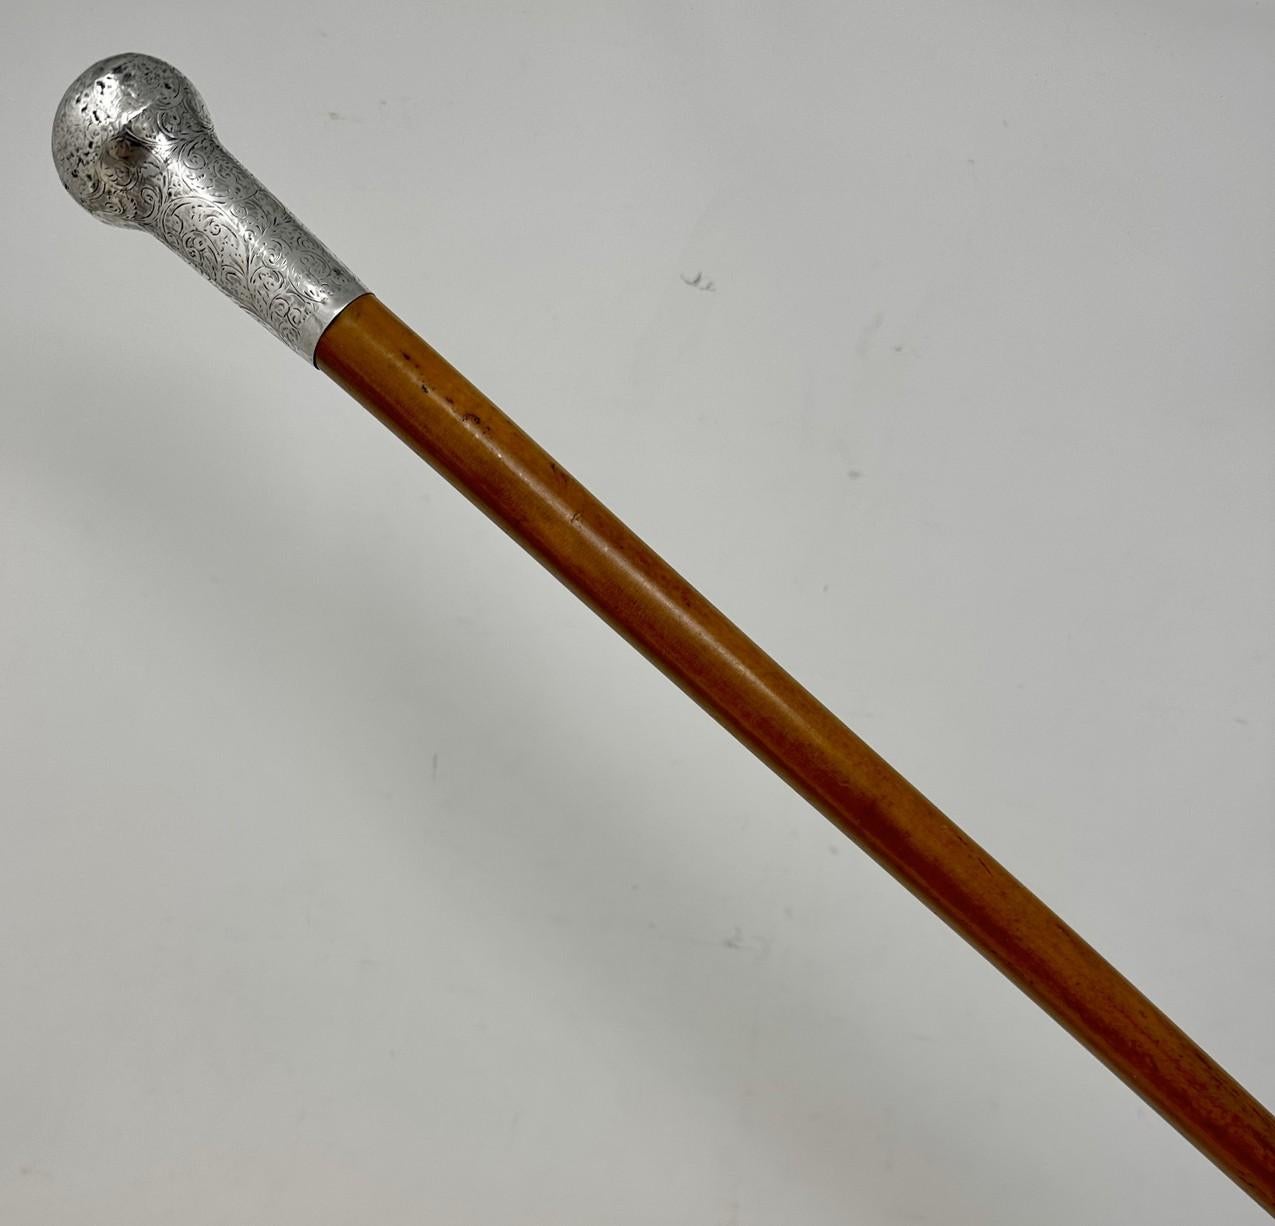 Fine Quality French Polished Heavy Gauge Blonde Malacca Walking Cane with Highly Decorative Embossed Silver Grip, made by renowned English Stick Maker Charles Feldman.  

The circular silver knopped grip above a tapering turned Malacca tapering